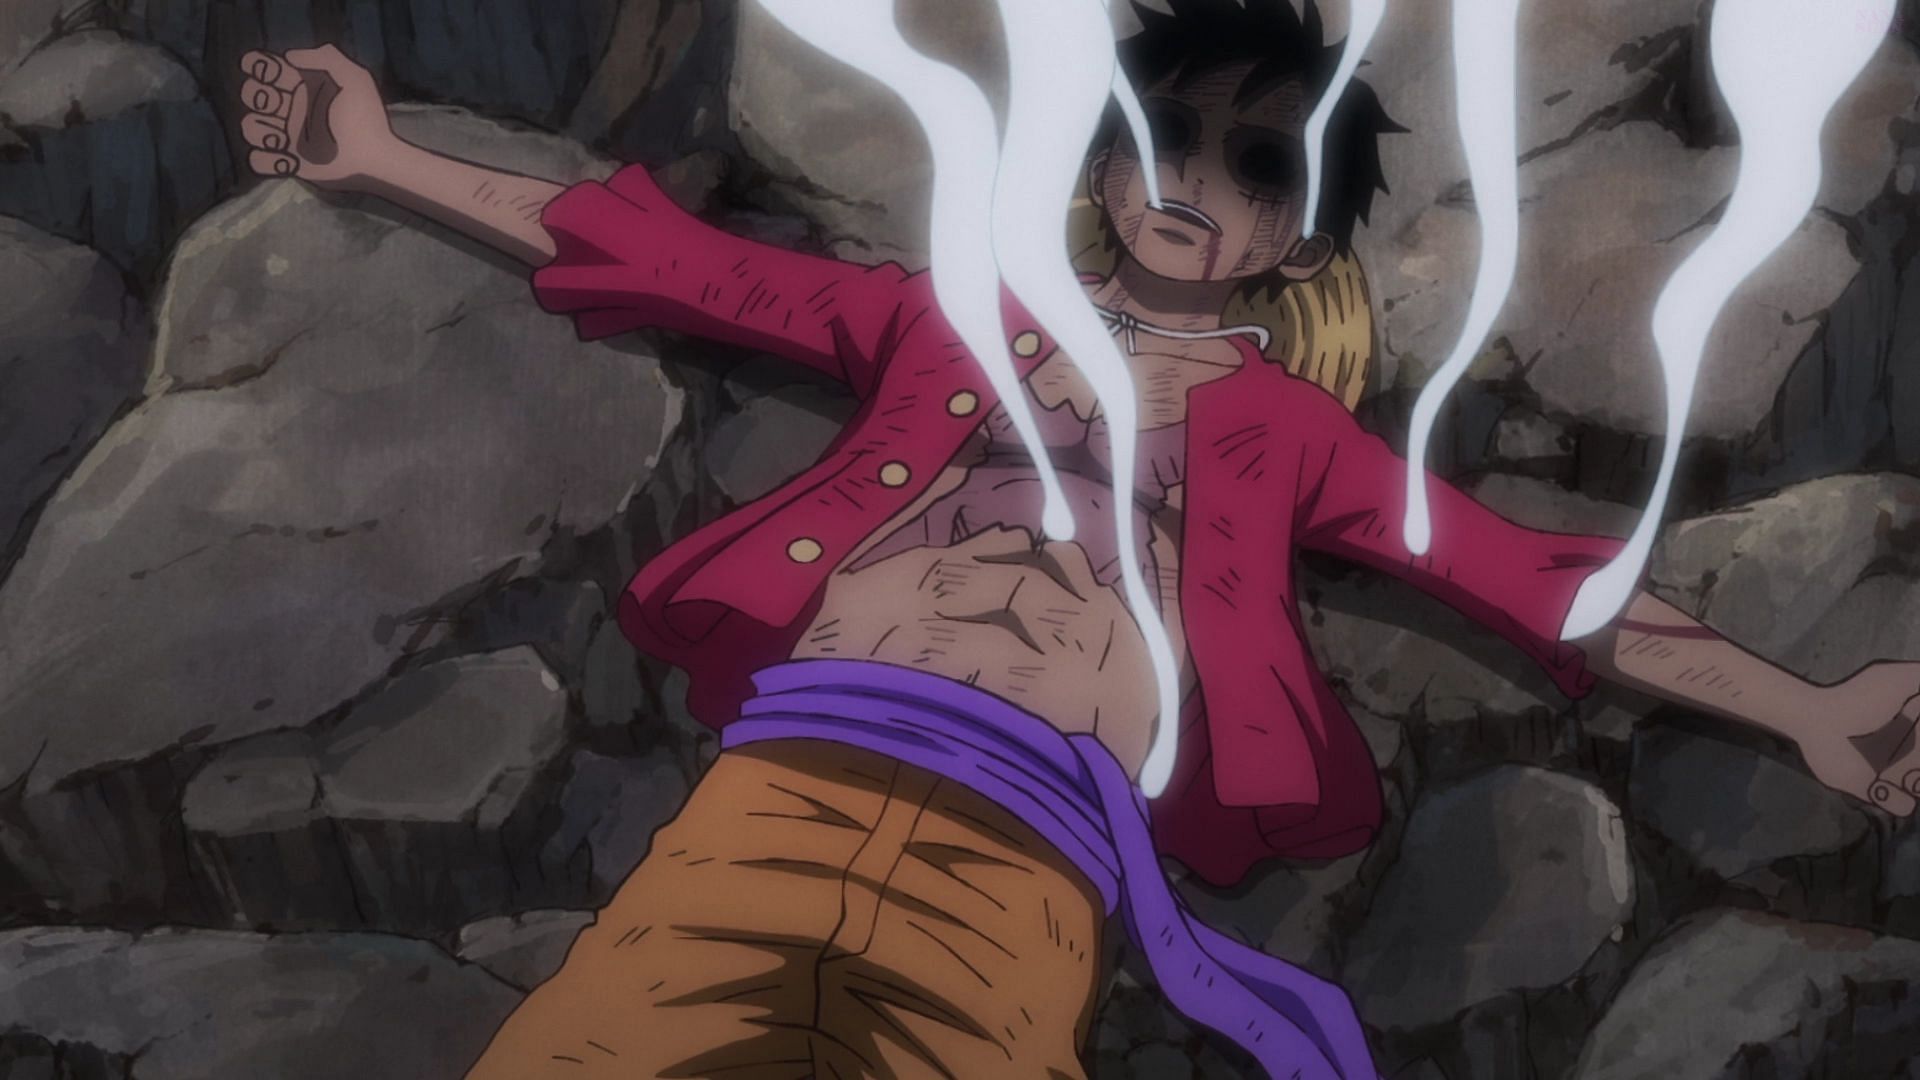 One Piece episode 1,071 is more than just a transformation for